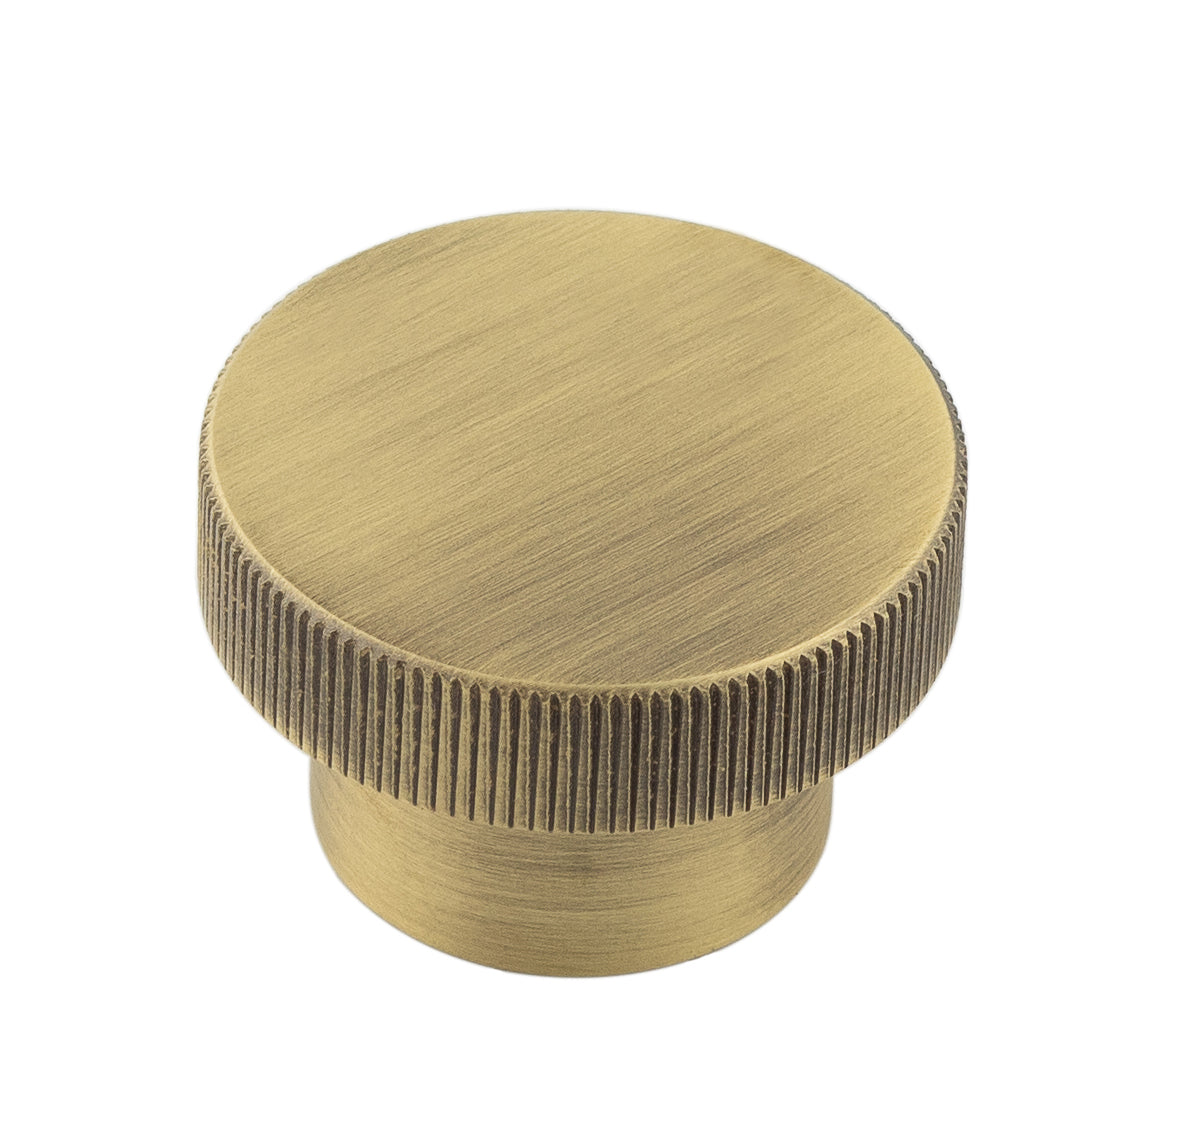 Hoxton Thaxted Cupboard Knobs 40mm